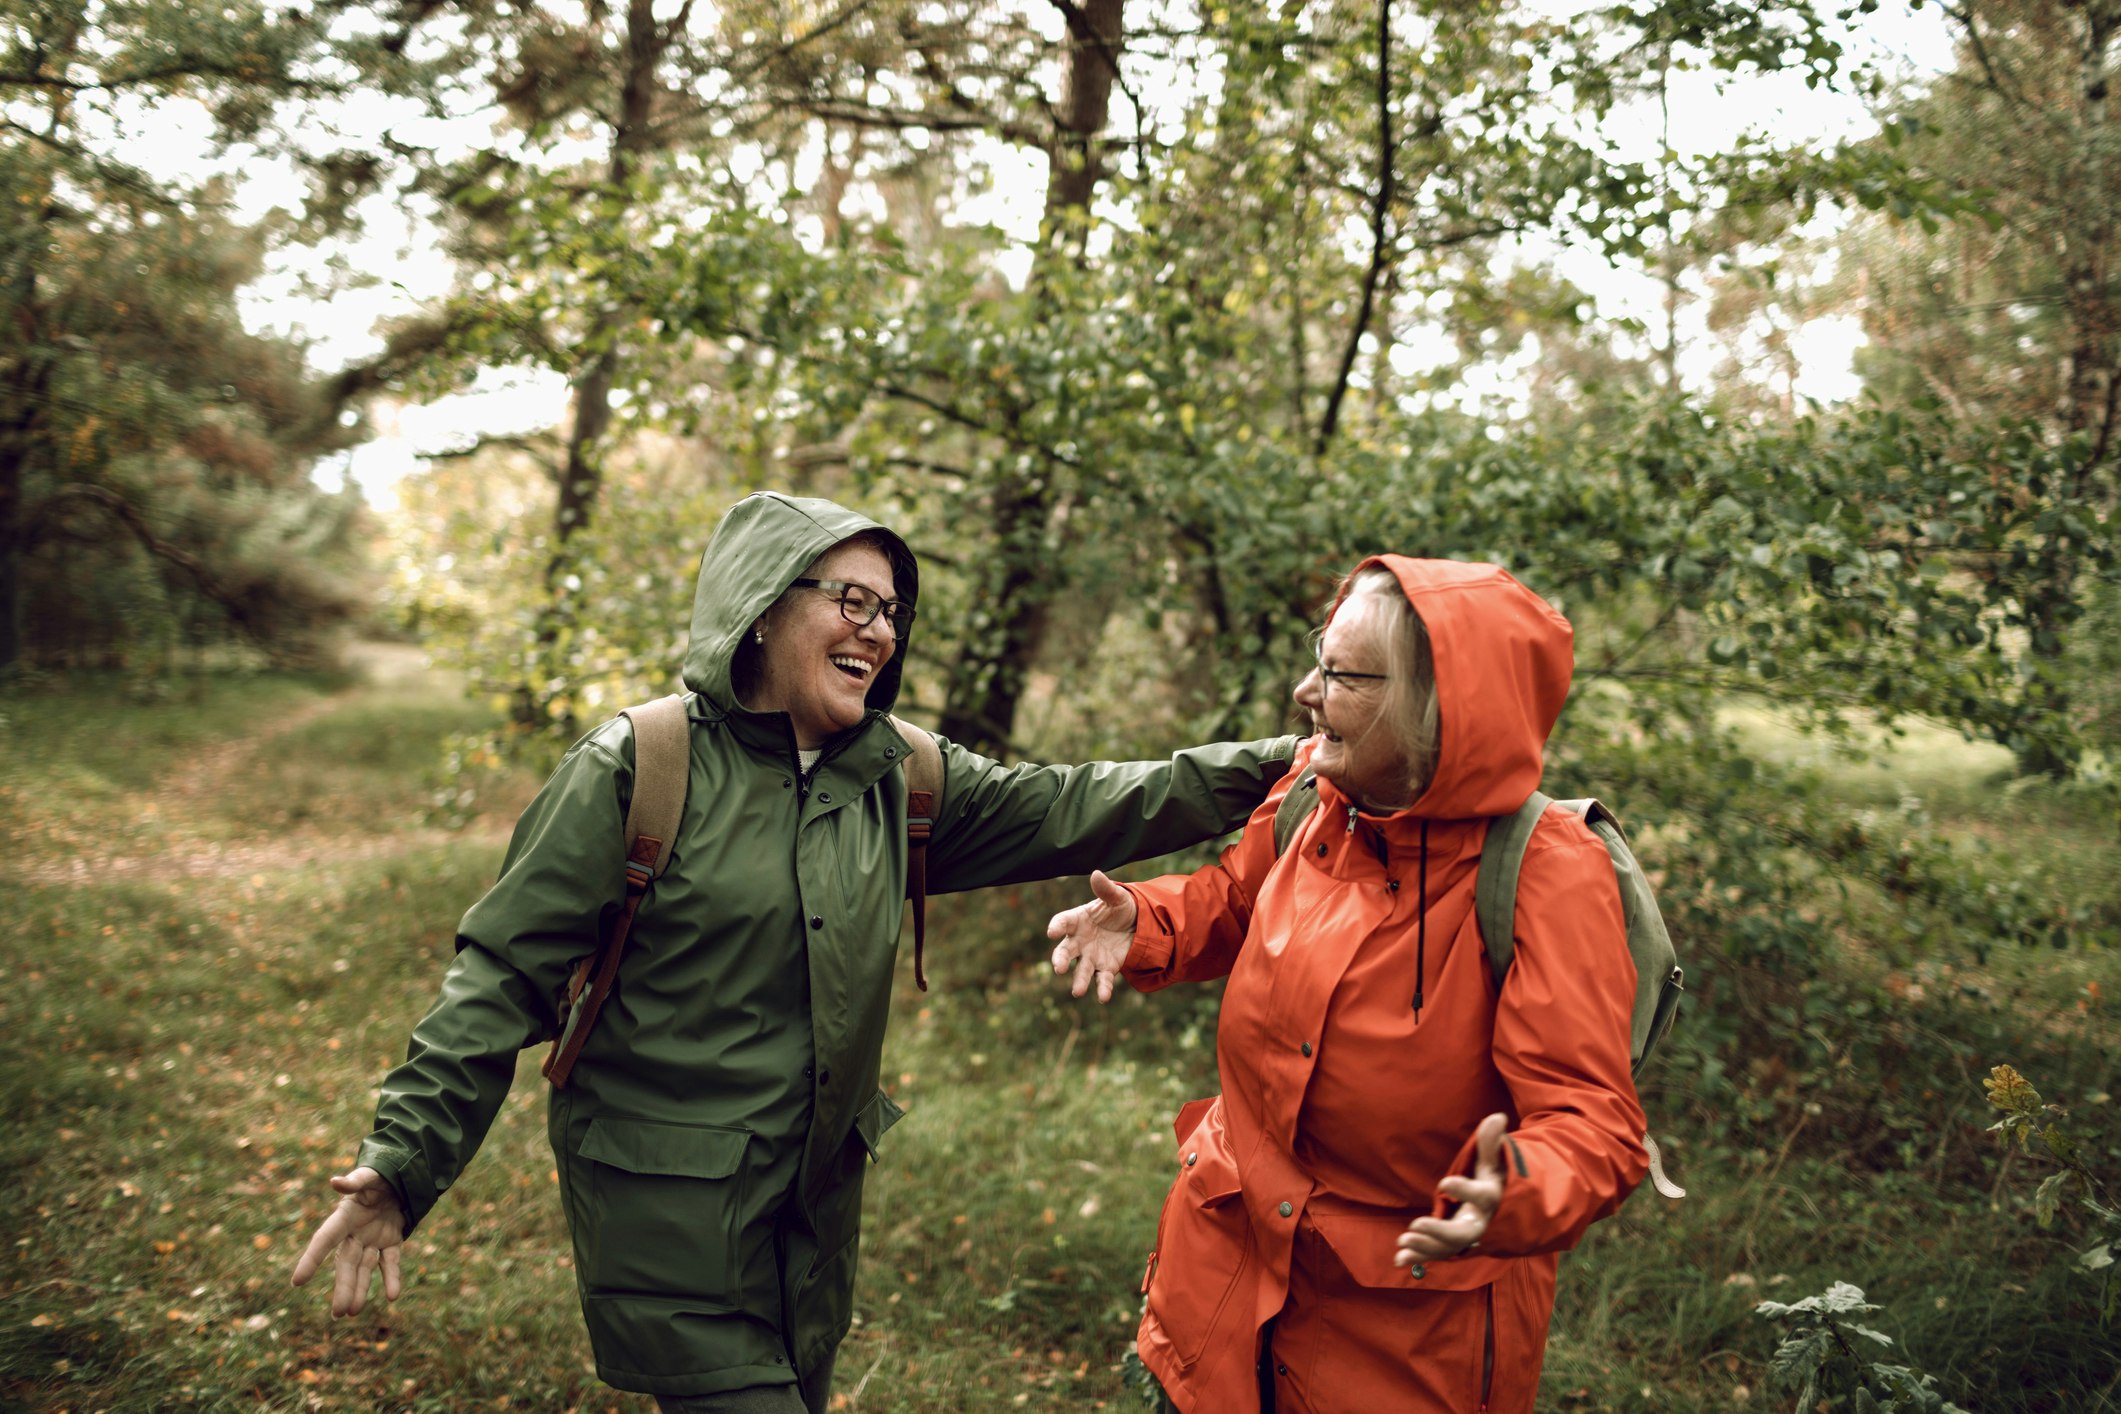 Two women in raincoats hiking through a forest and laughing together